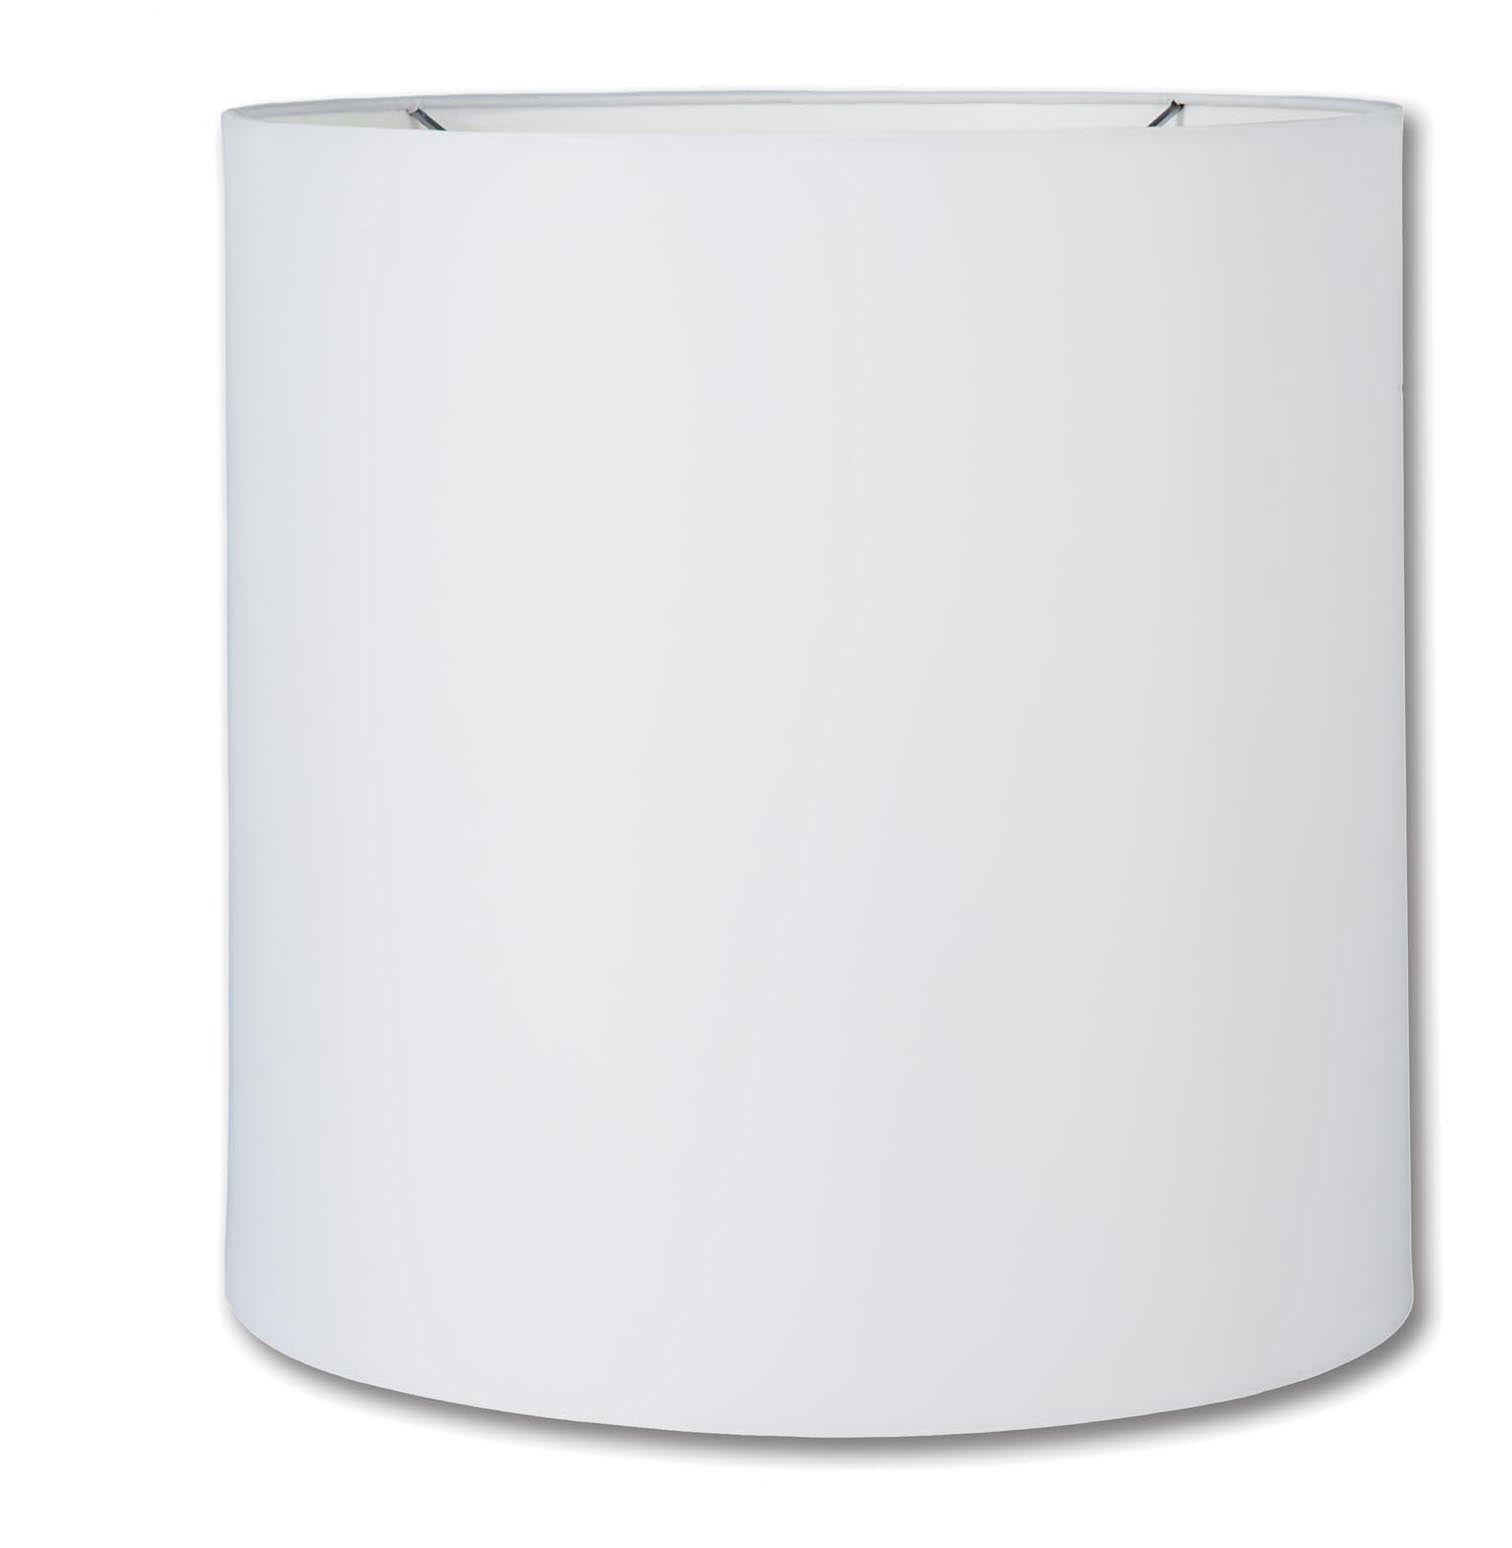 Deep Drum Hardback Lamp Shades - White Color, Microfiber Chiffon Material, Nickel Plated Washer Fitter